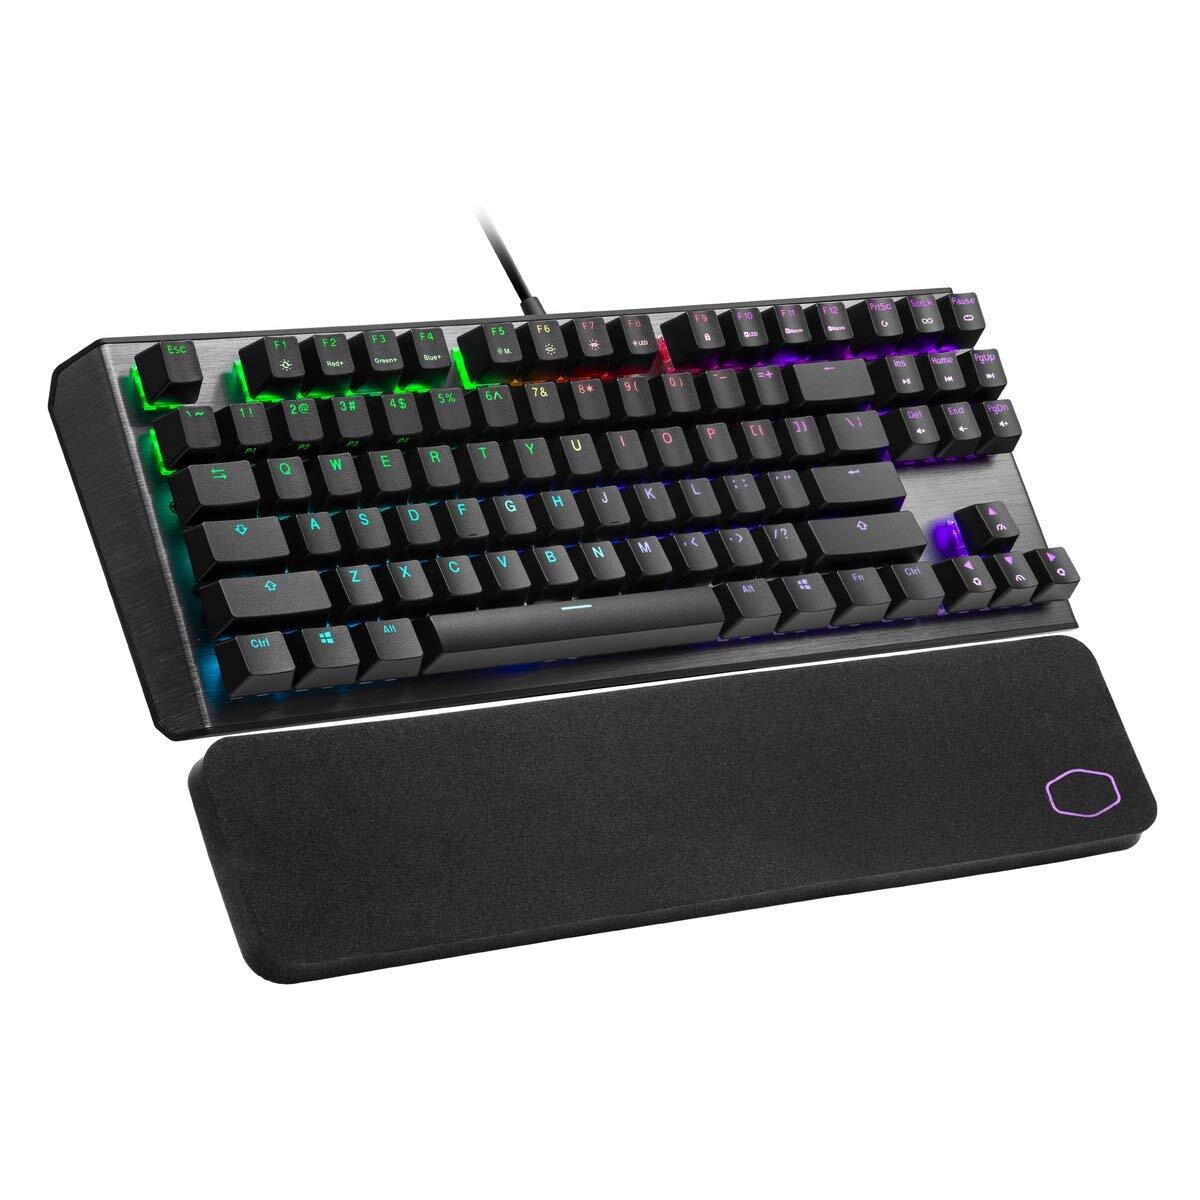 Cooler Master CK530 V2 Tenkeyless Gaming Mechanical Keyboard Brown Switch with RGB Backlighting, On-The-Fly Controls, and Aluminum Top Plate